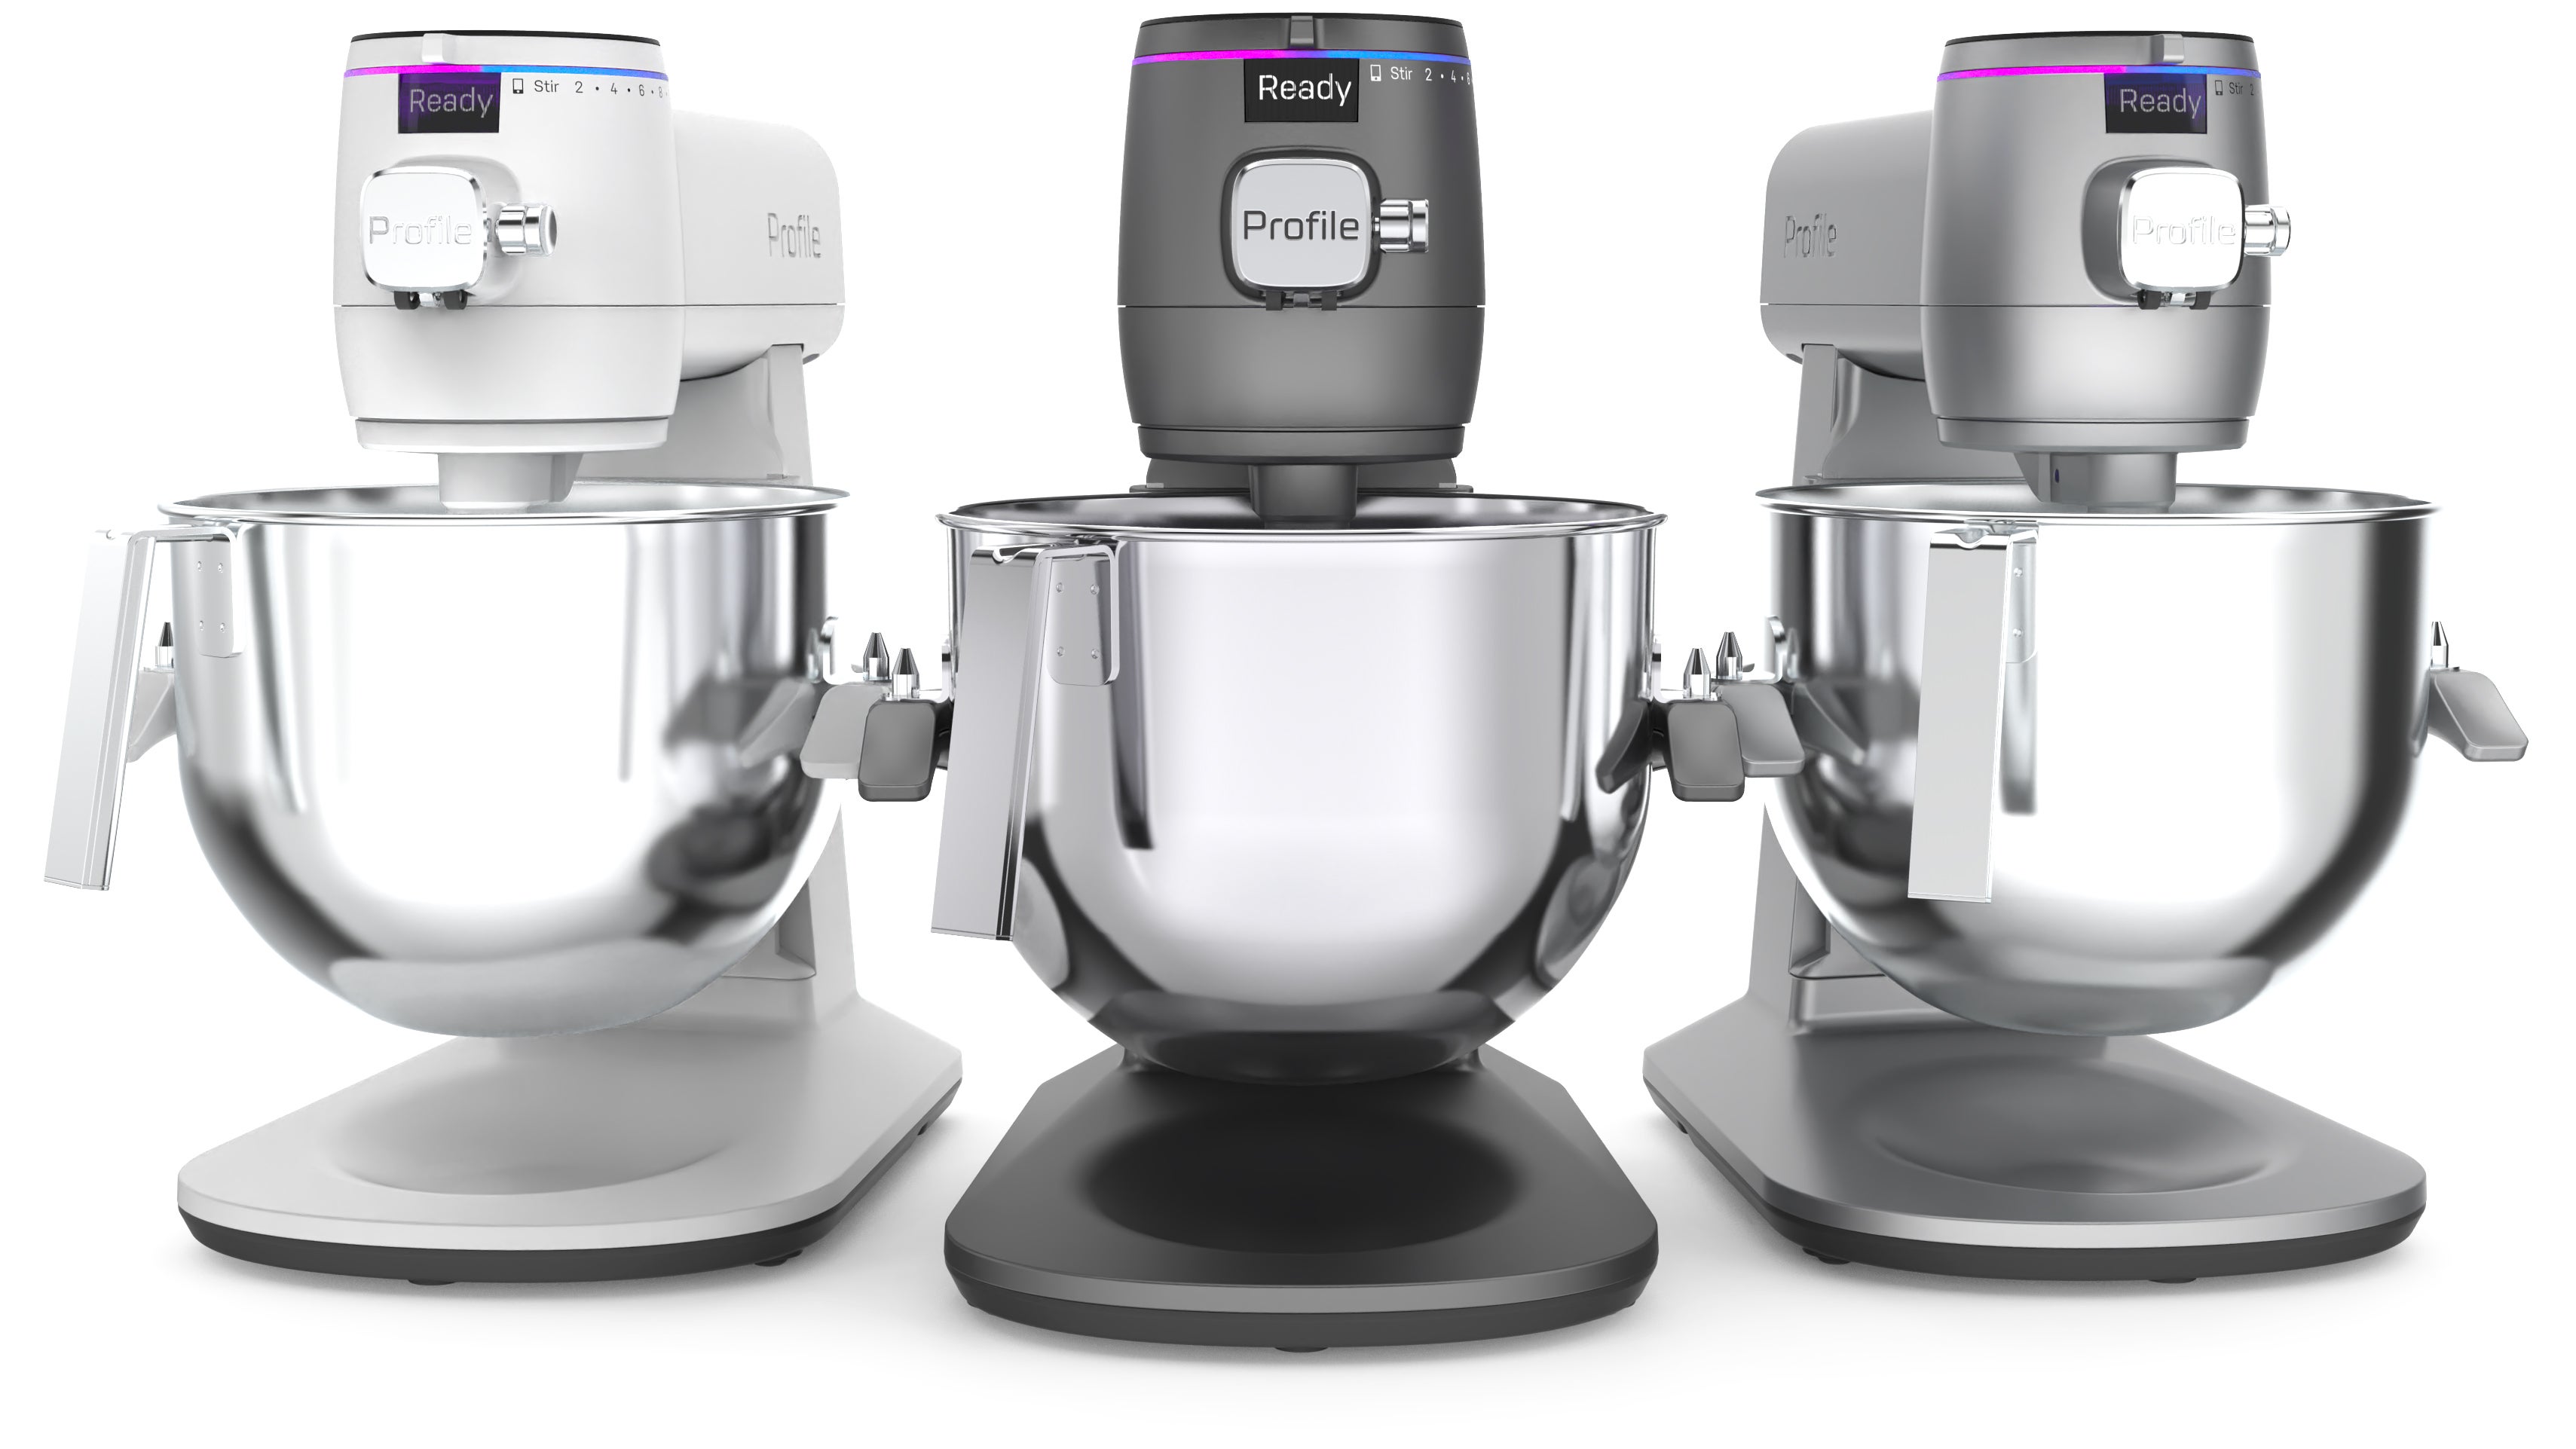 GE’s Smart Mixer Weighs All Your Baking Ingredients for You